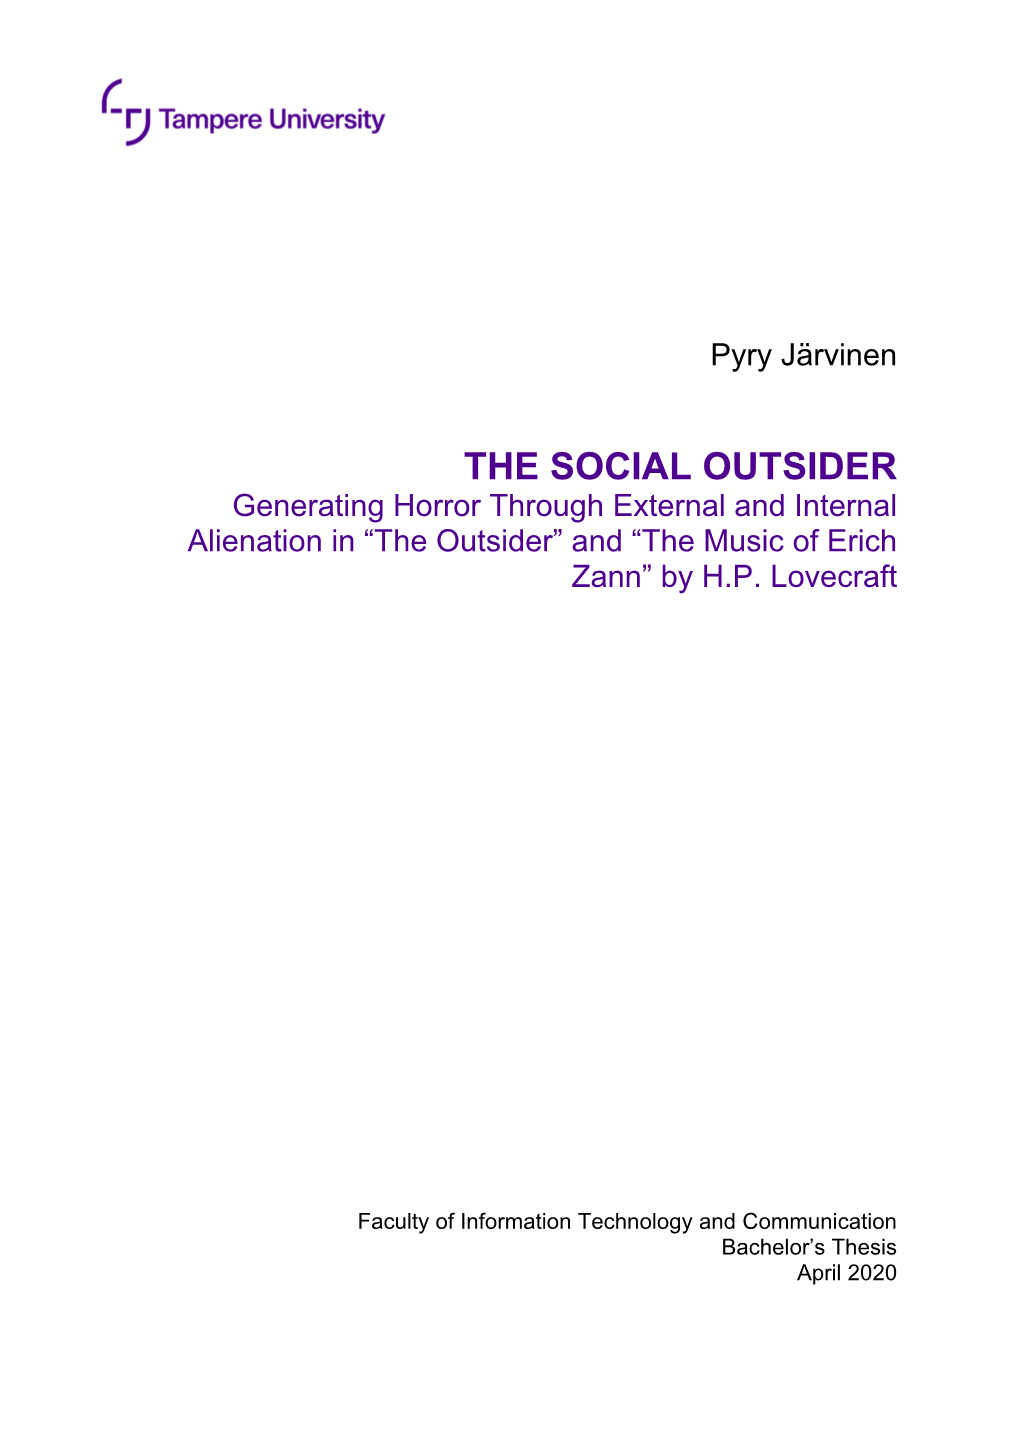 THE SOCIAL OUTSIDER Generating Horror Through External and Internal Alienation in “The Outsider” and “The Music of Erich Zann” by H.P